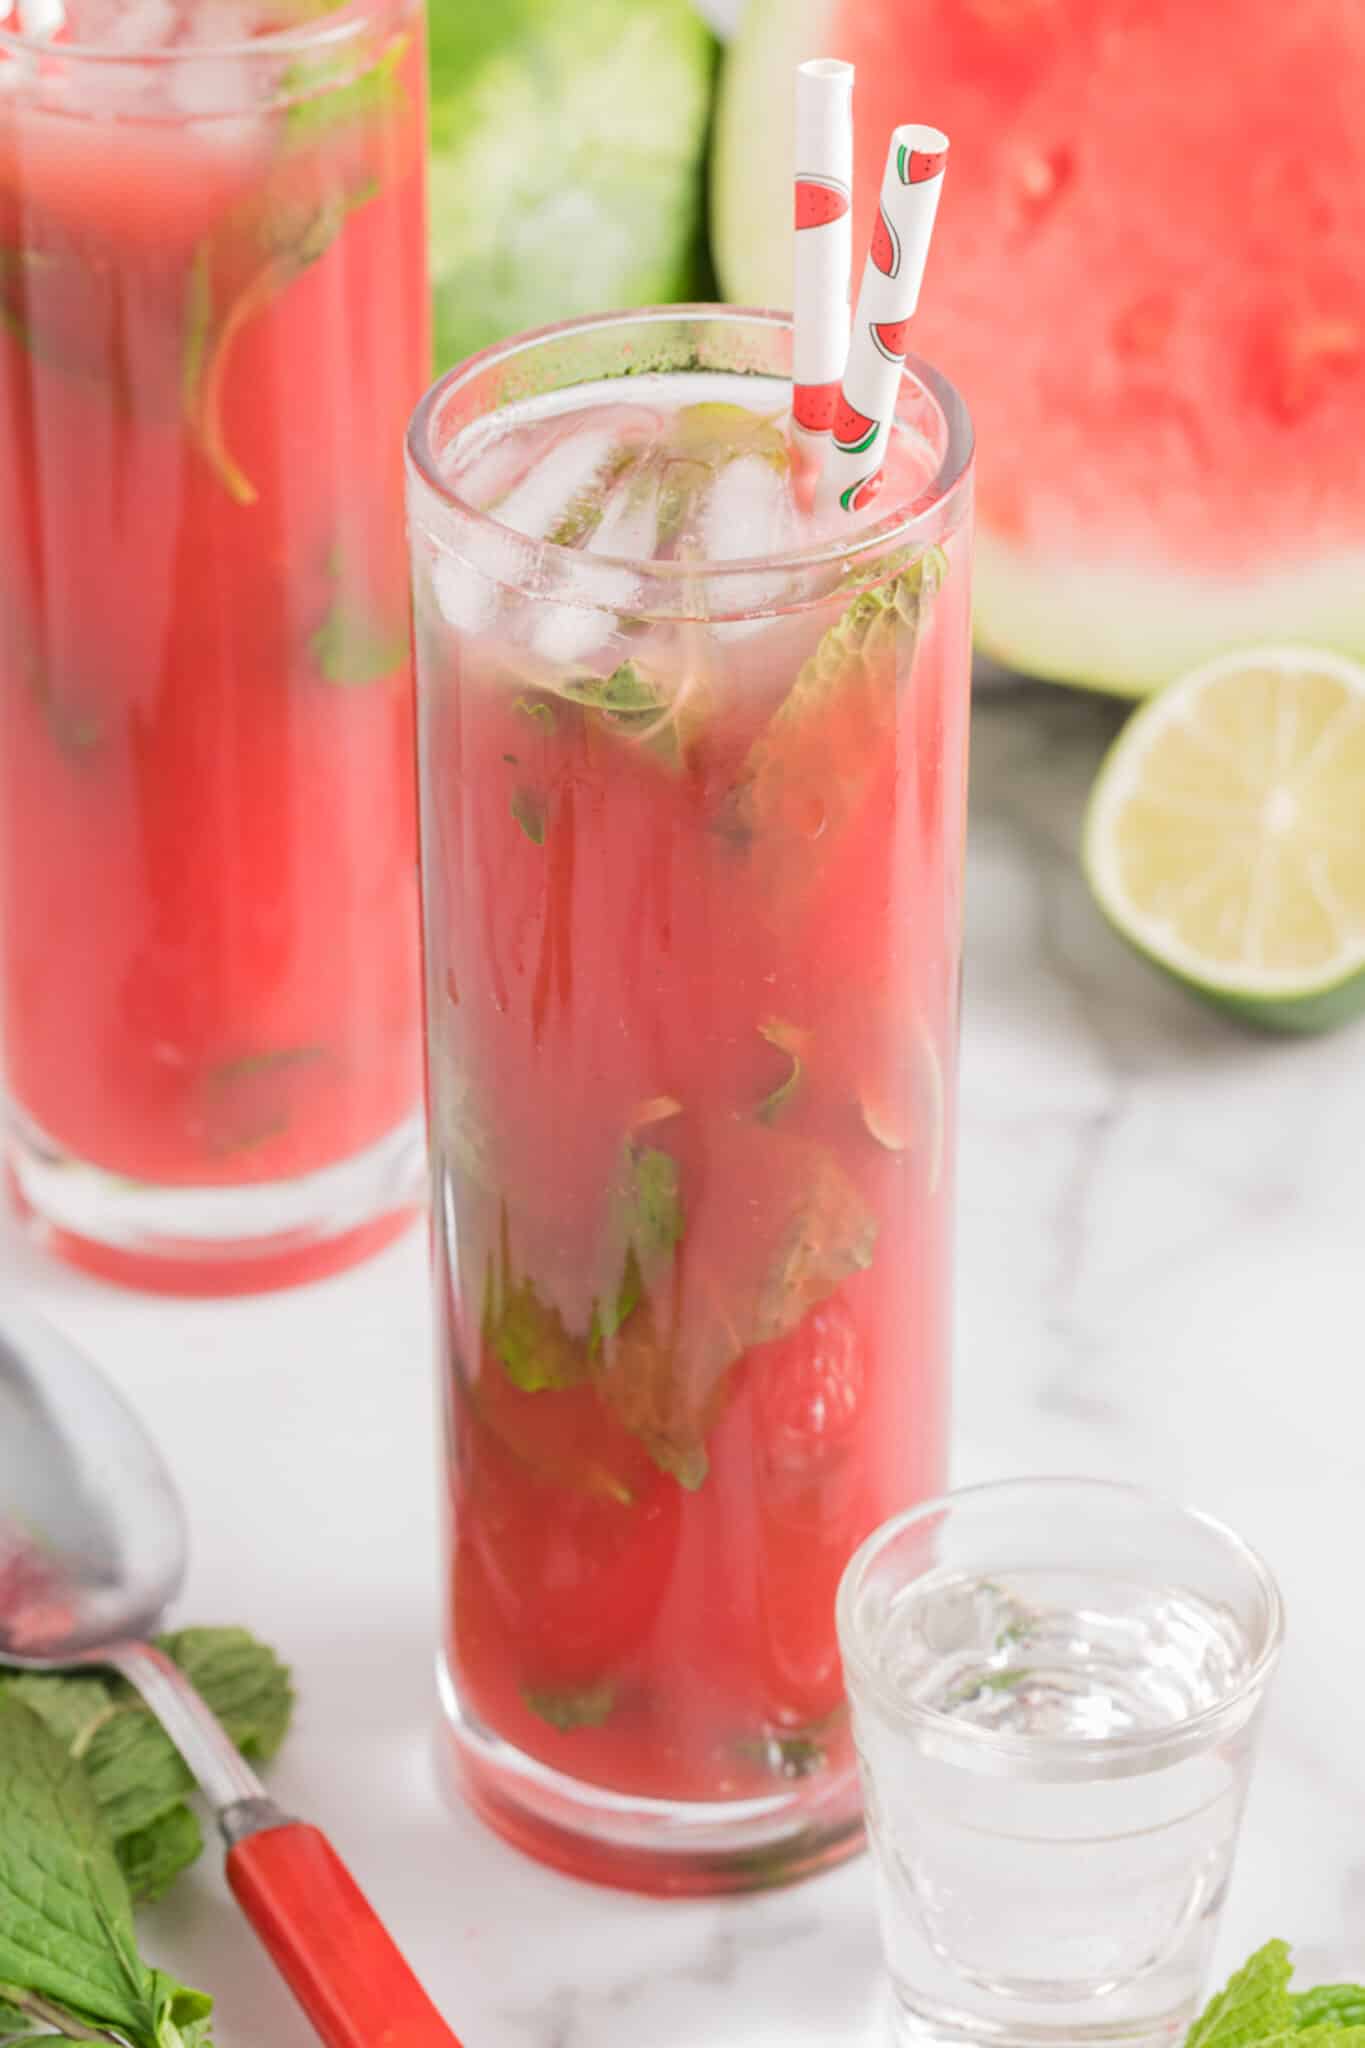 A tall glass filled with watermelon vodka cocktail and a straw.